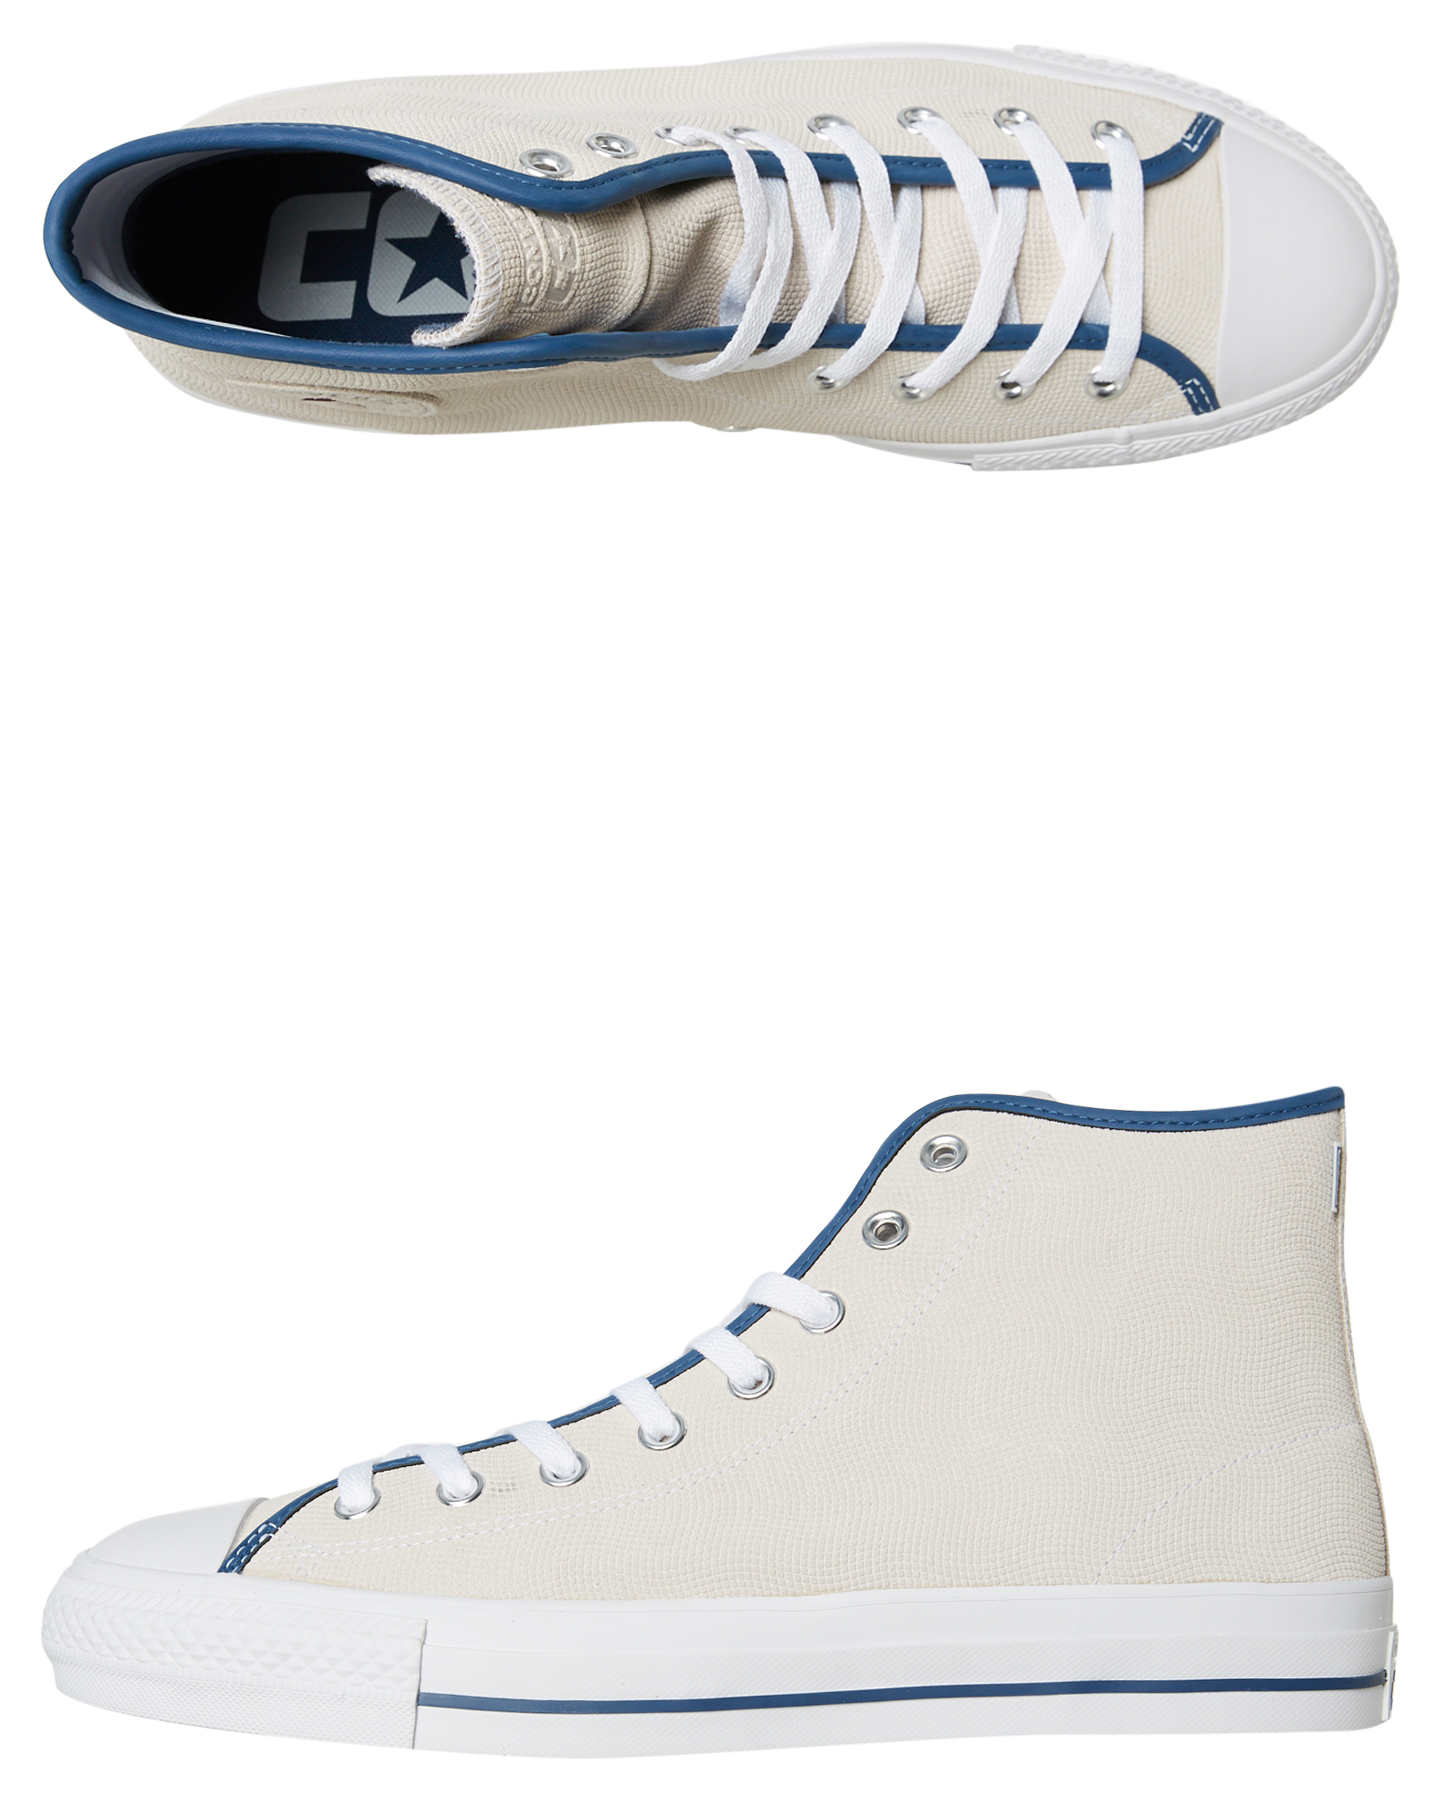 converse style shoes mens